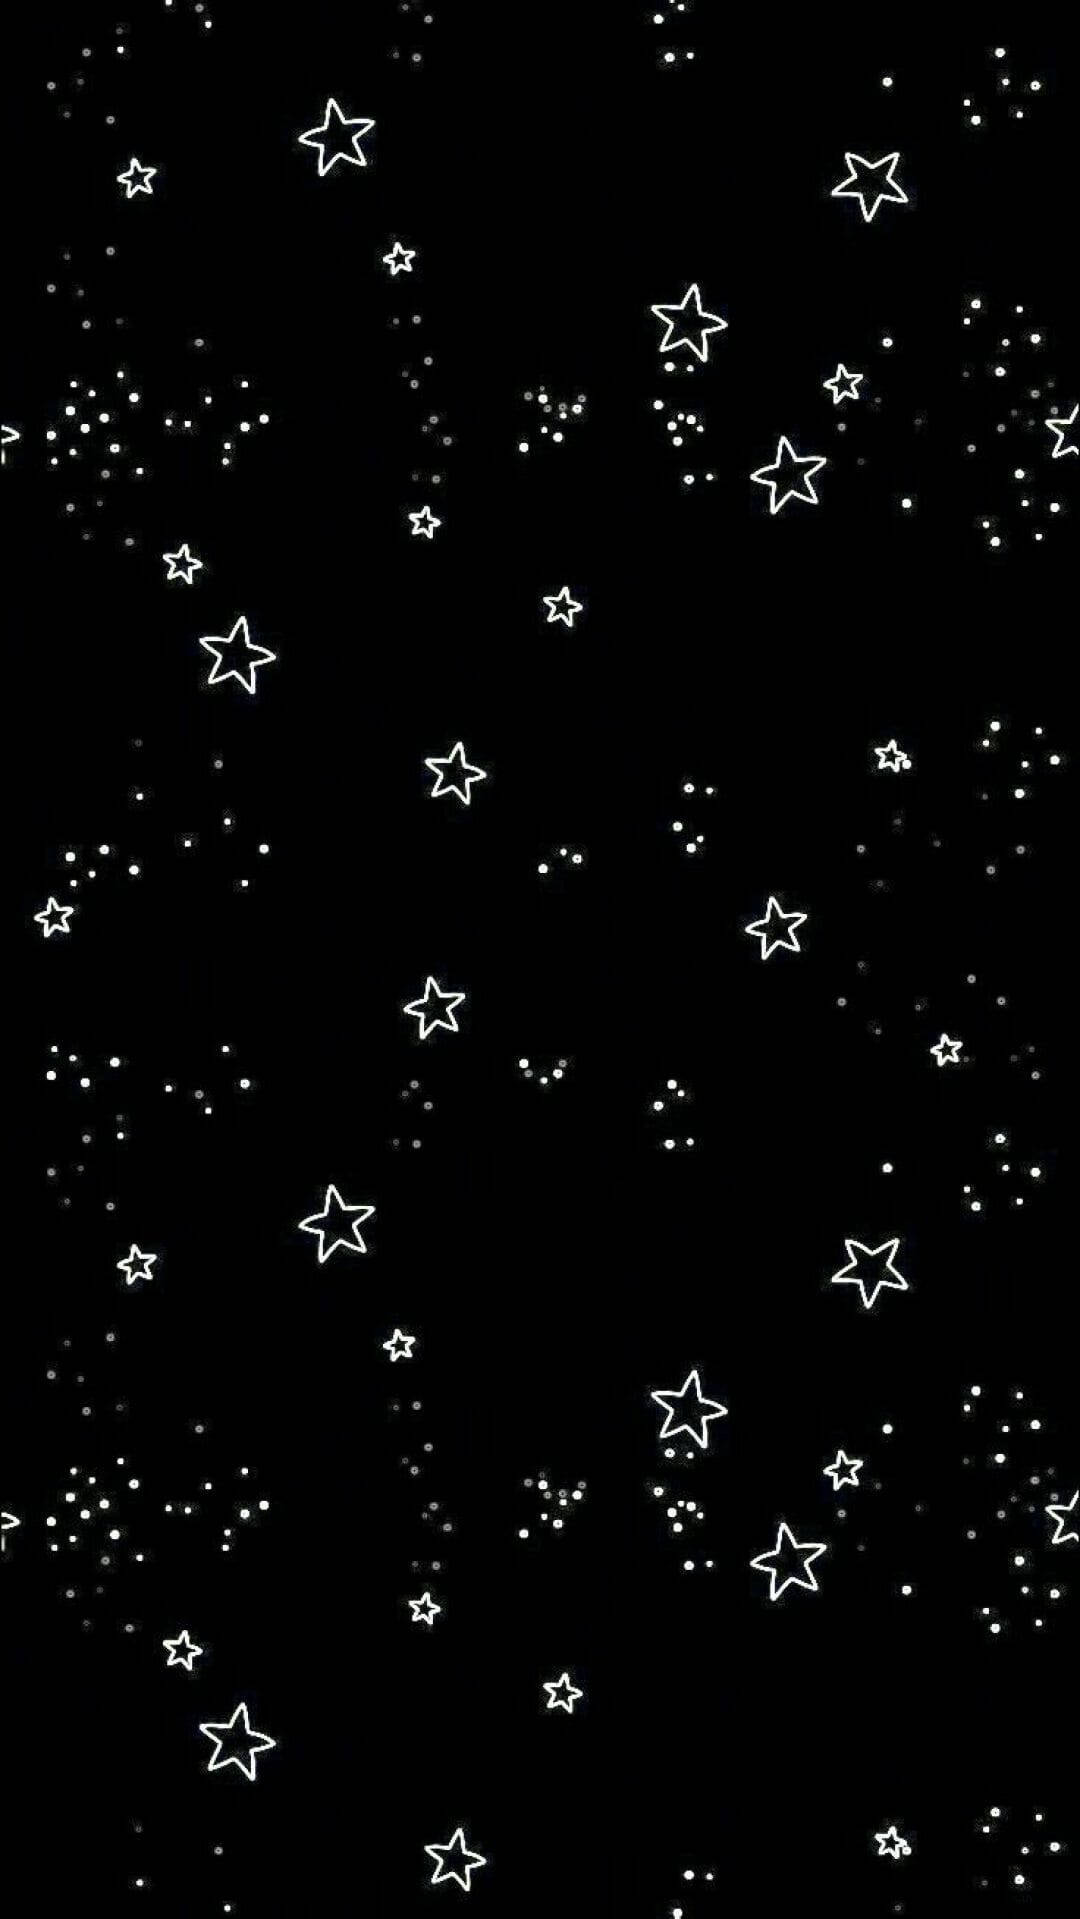 Starry Aesthetic Grunge Iphone Background